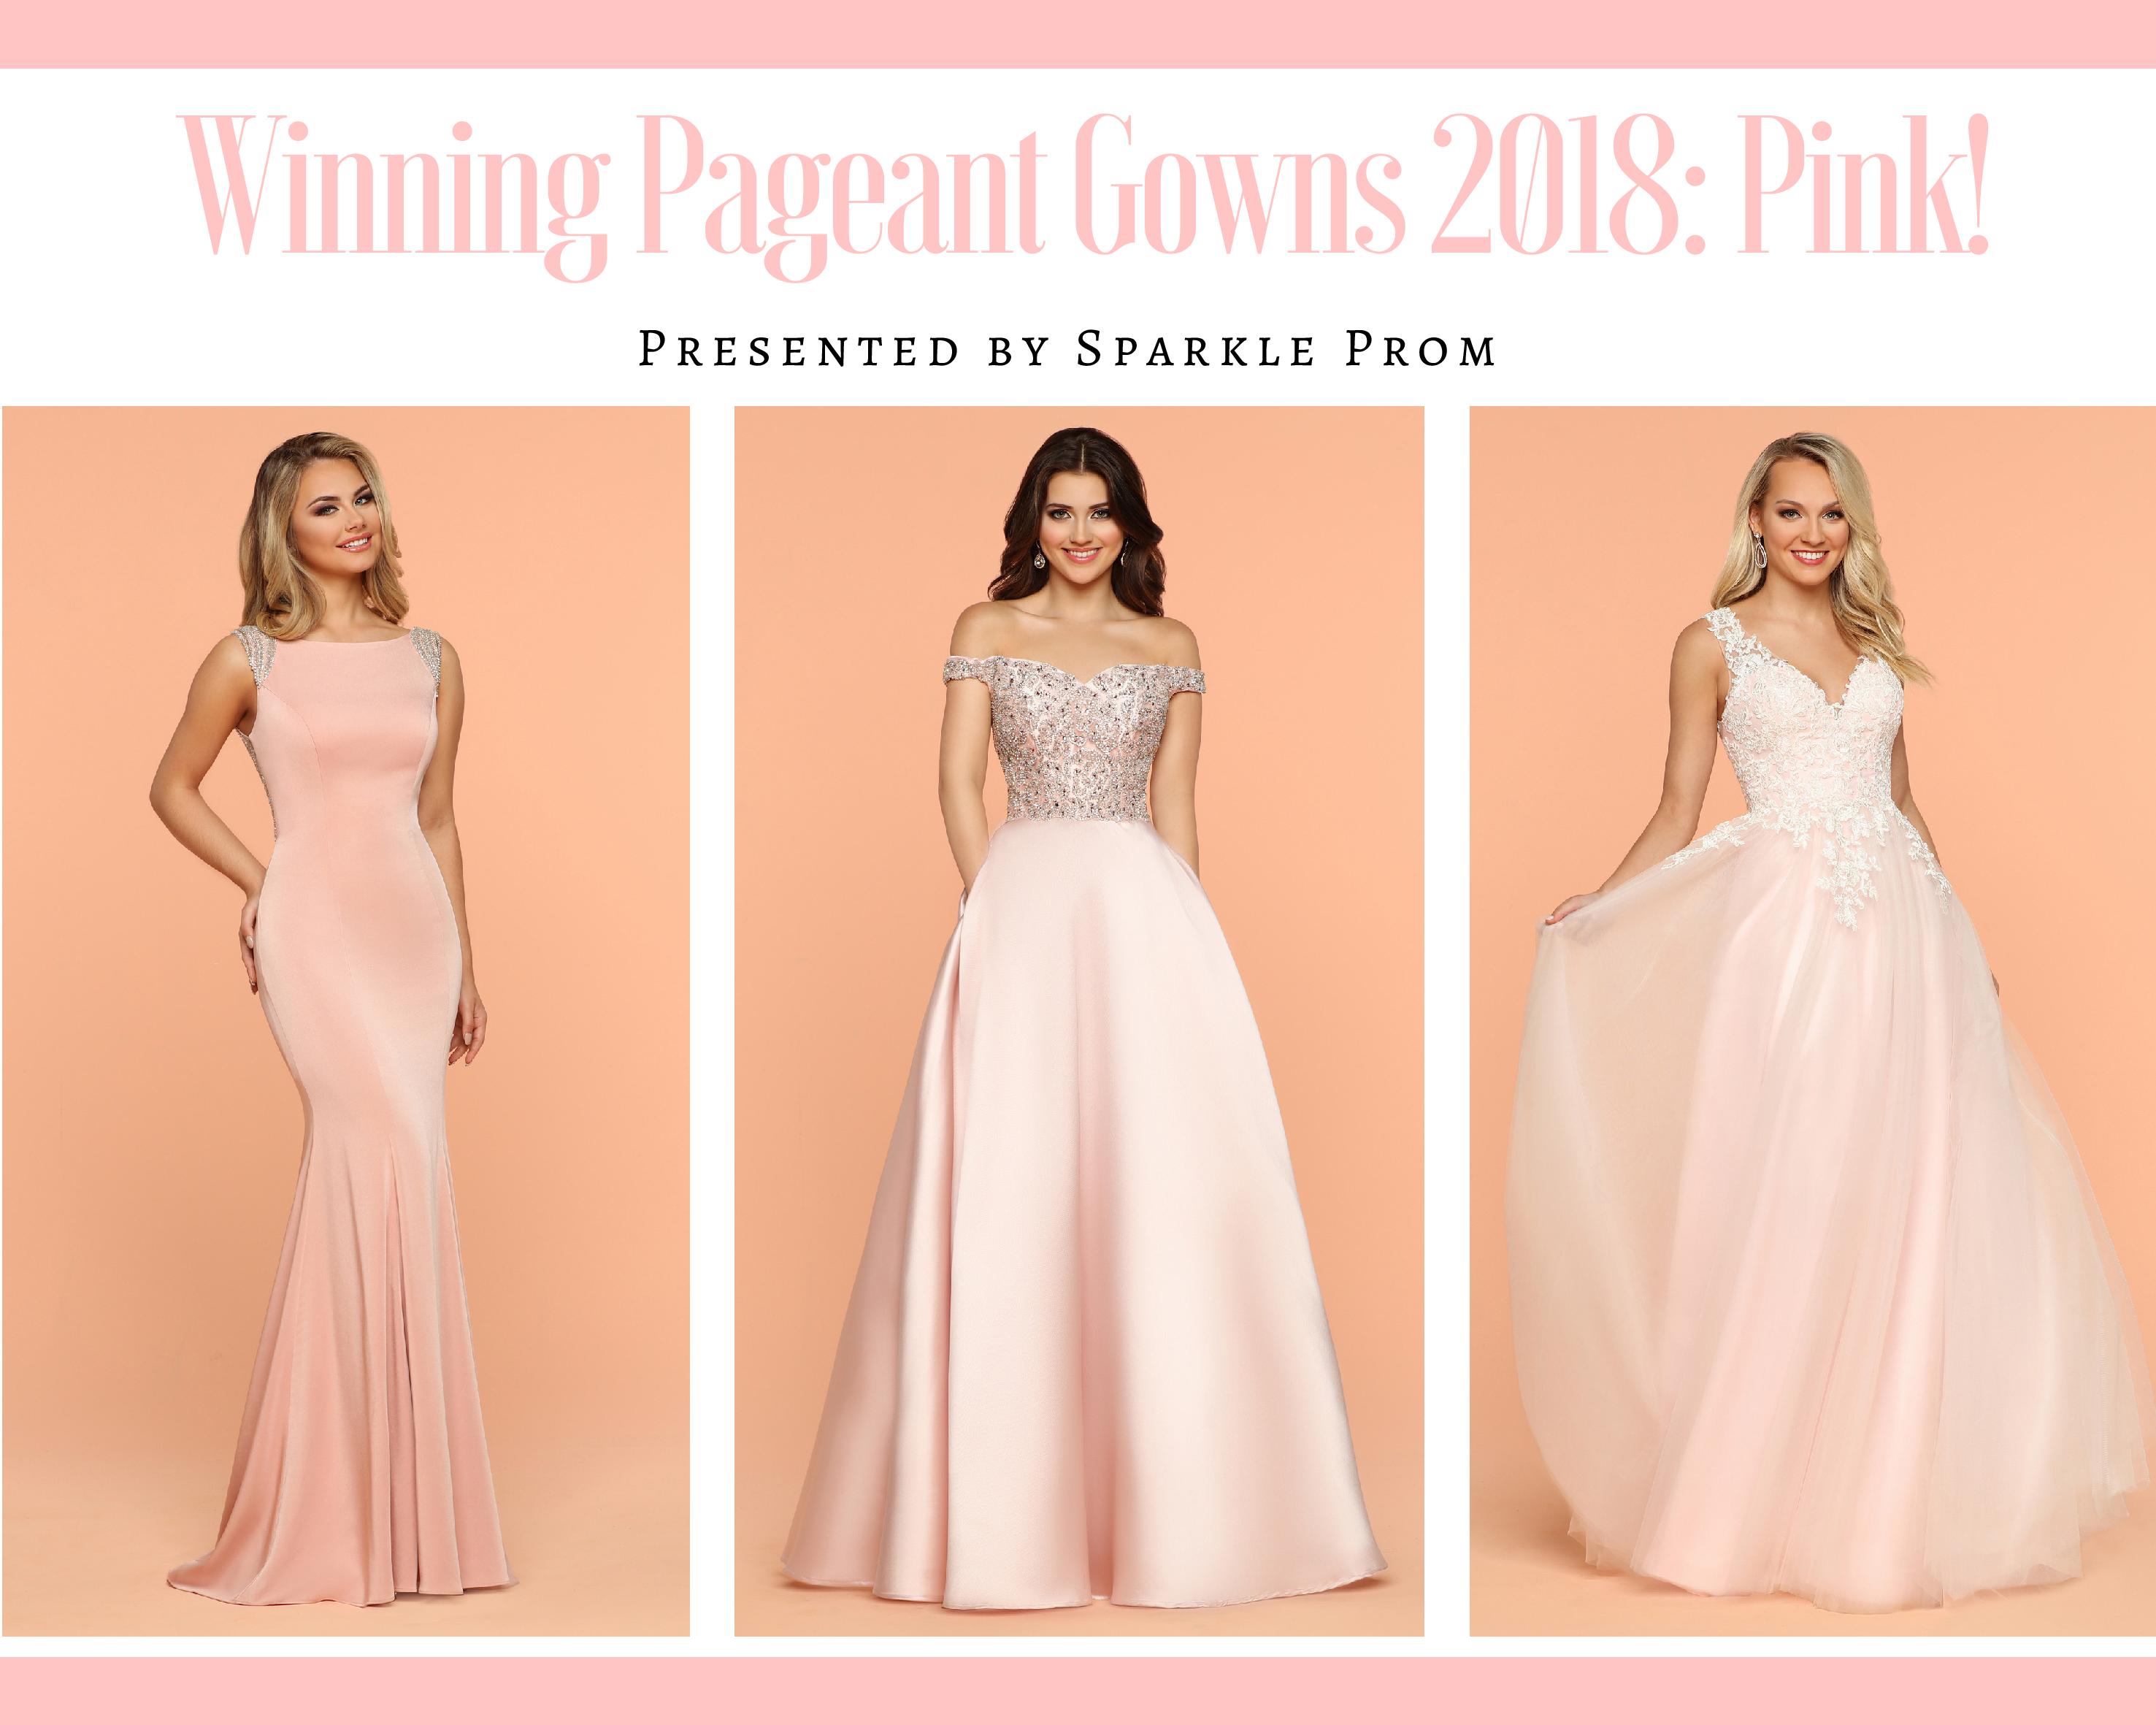 Winning Pageant Gowns 2018: Pink Prom Gowns – Sparkle Prom Fashion Blog